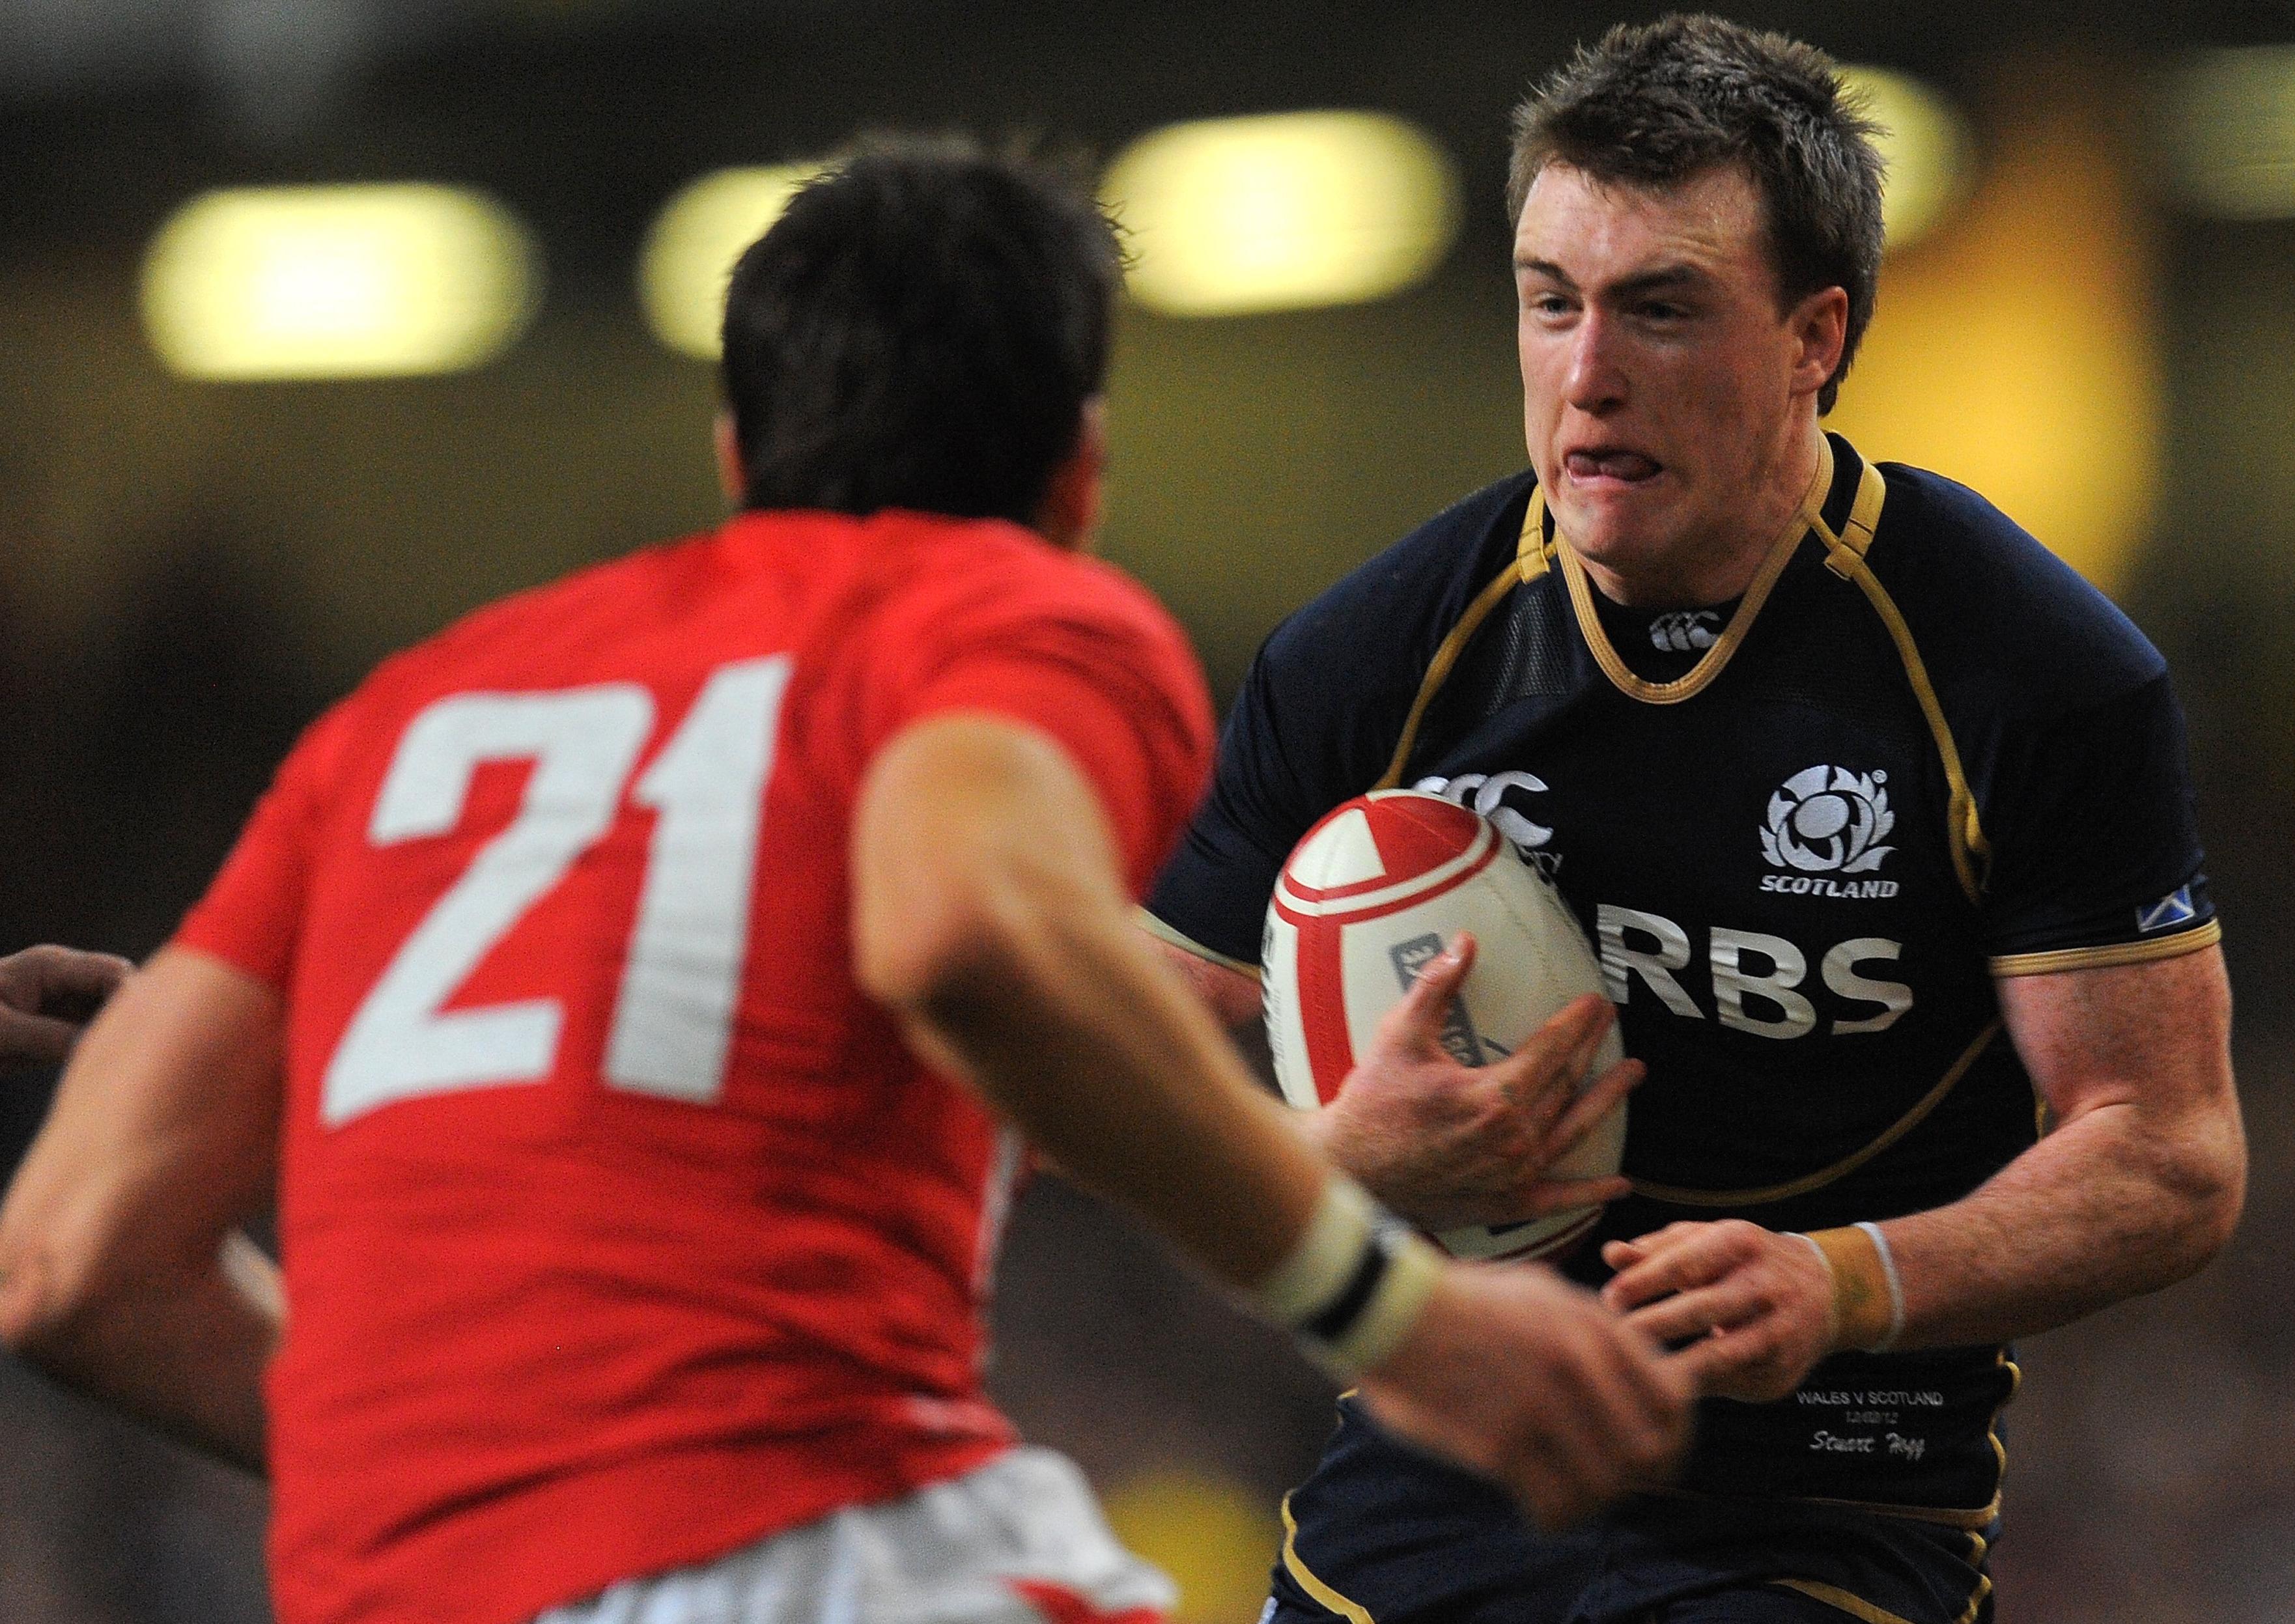 Scotland's Stuart Hogg (R) runs at Wales' James Hook during the Six Nations International rugby union match between Wales and Scotland at the MIllennium stadium in Cardiff, Wales on February 12 2012. AFP PHOTO/ANDREW YATES RESTRICTED TO EDITORIAL USE. (Photo credit should read ANDREW YATES/AFP via Getty Images)